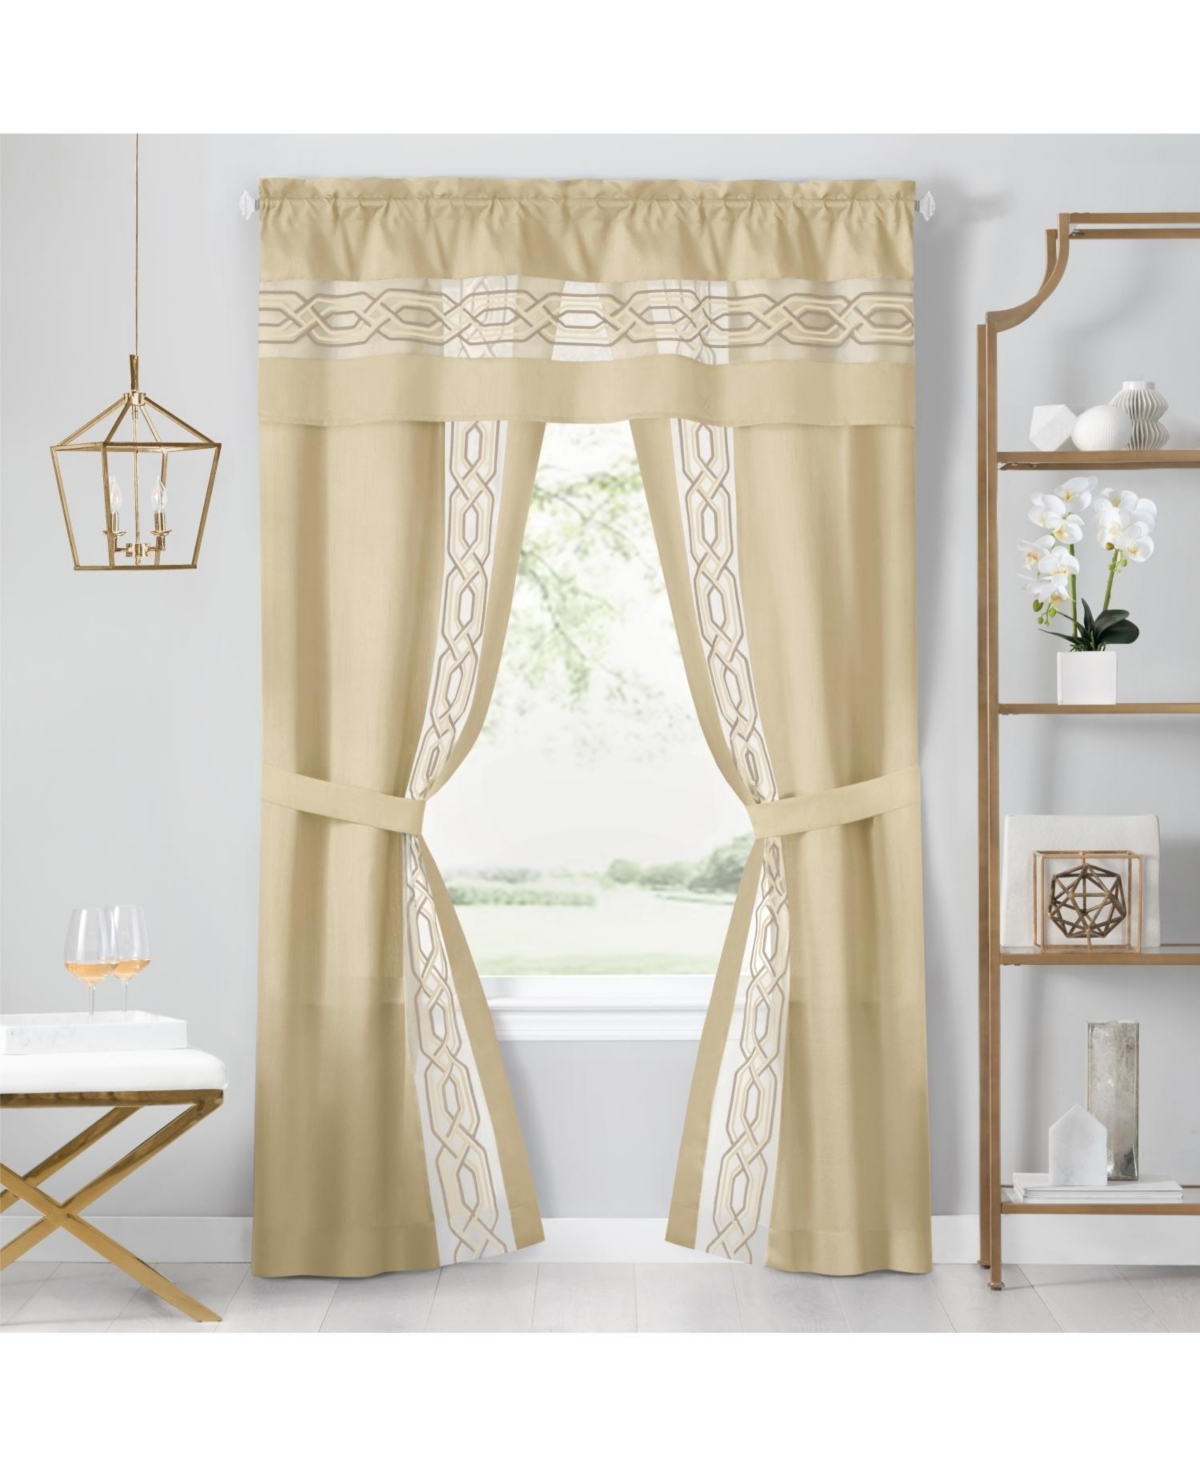 Pacifico 5 Piece Rod Pocket All In One Attached Semi Sheer Window Curtain Panels & Valance Set - Tan